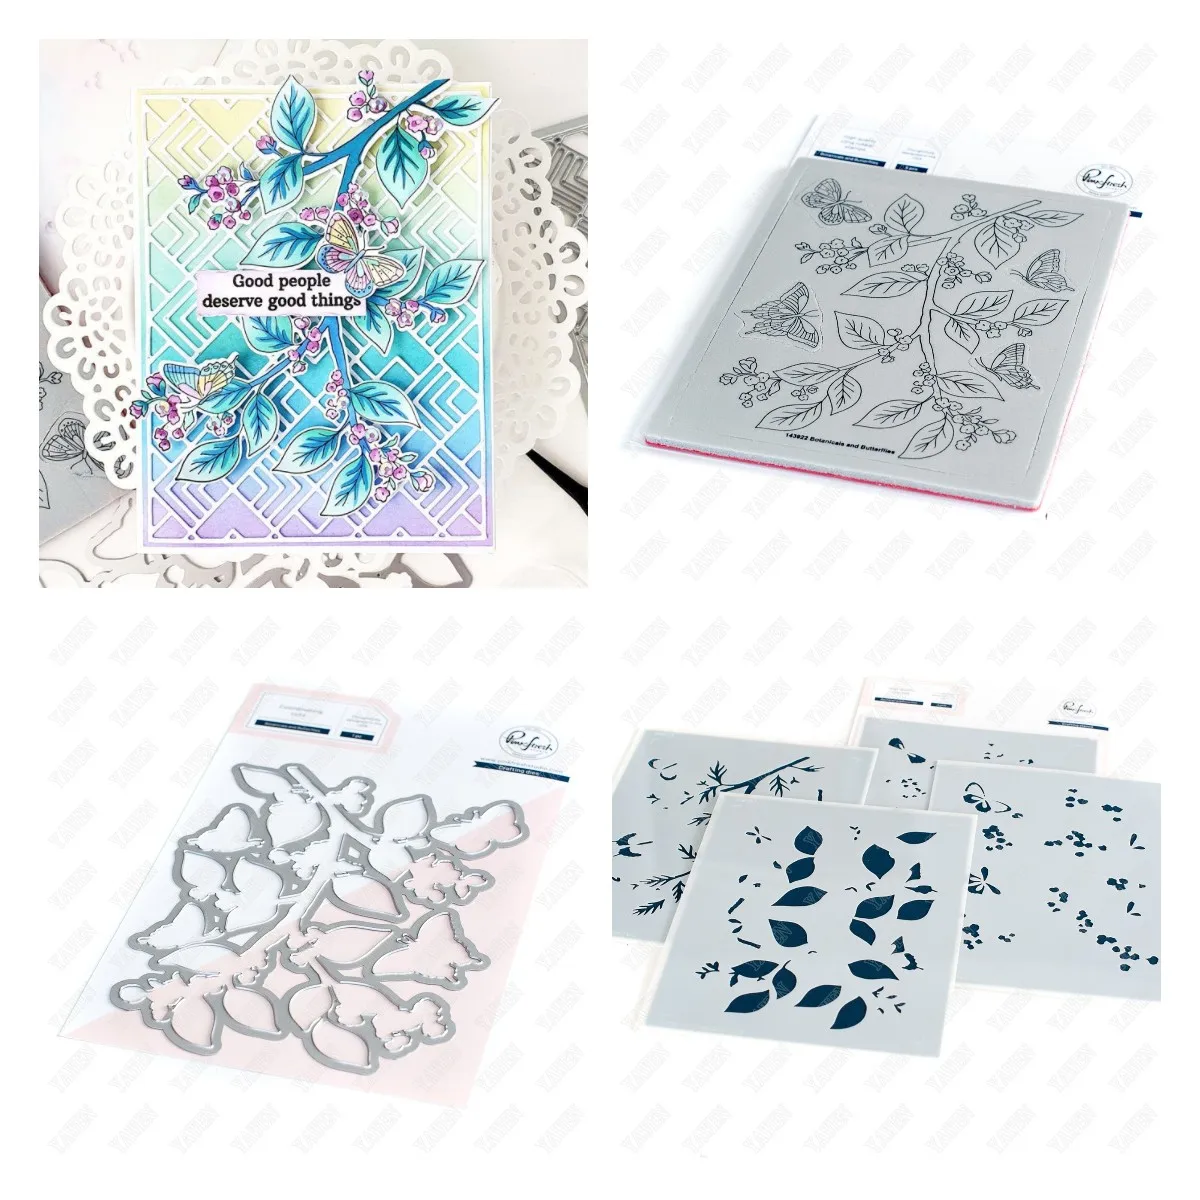 

Out Botanicals & Butterflies Metal Cutting Dies Stamps Stencil Craft Embossing Make Paper Greeting Card Making Template Diy